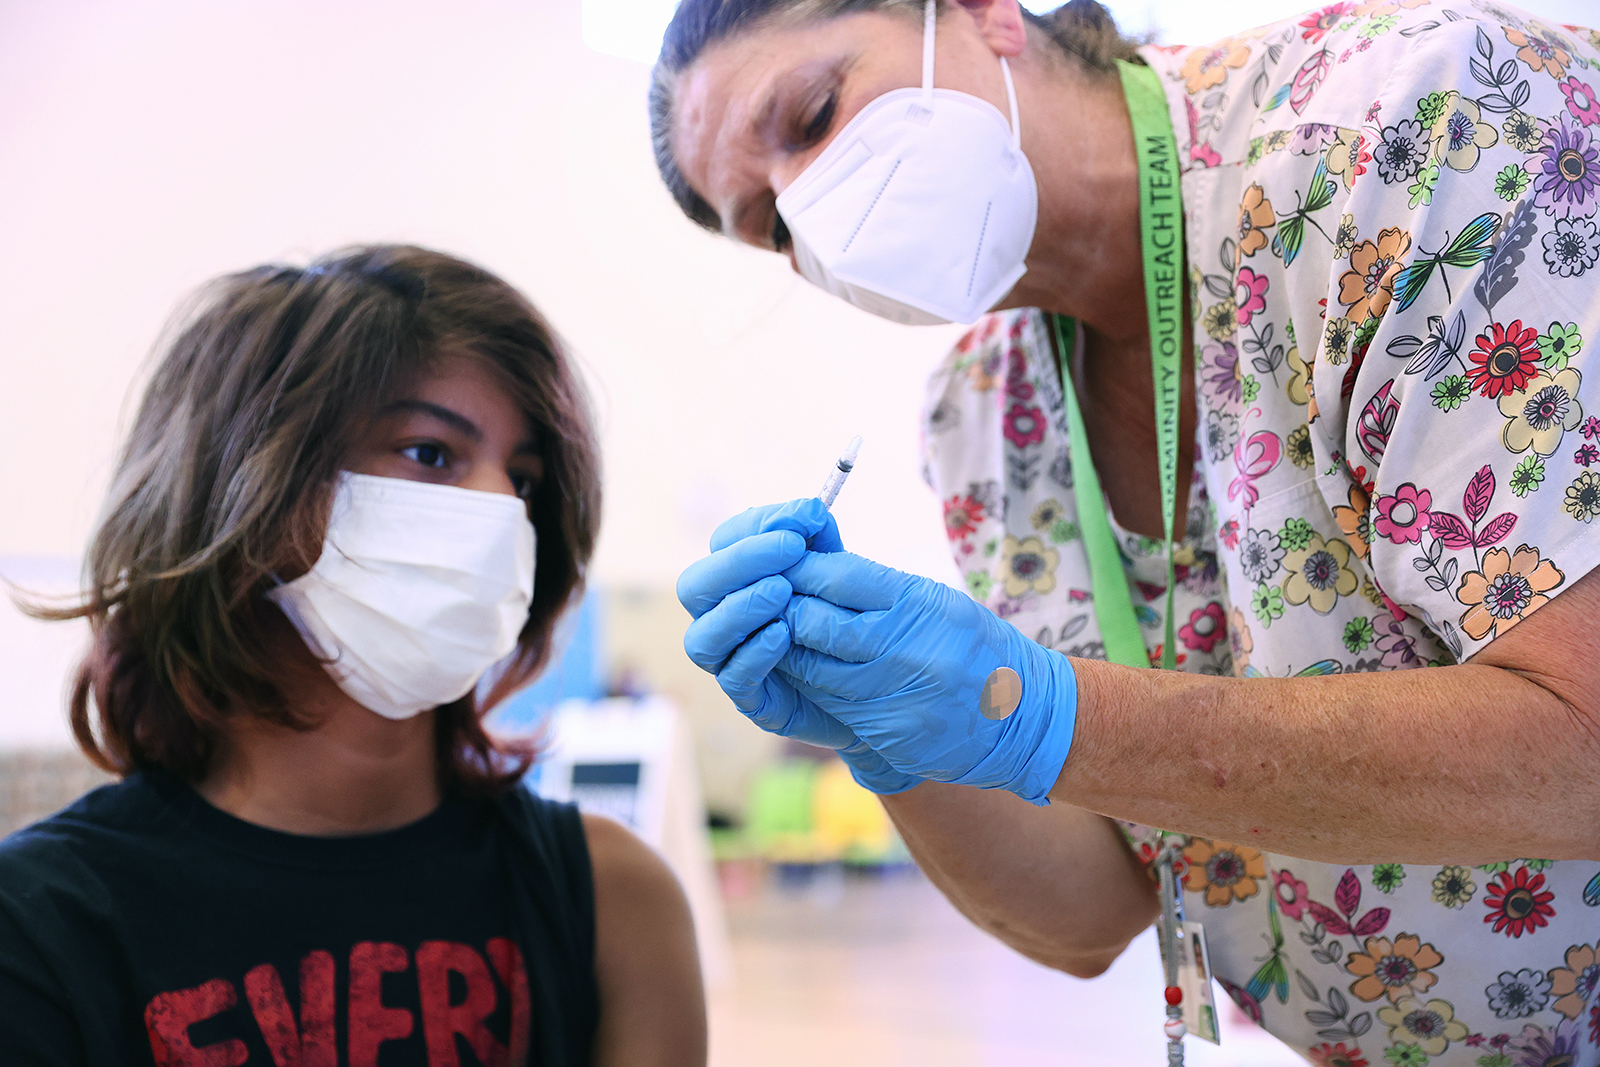 Registered nurse Sue Dillon explains the vaccination process to a student before administering a dose of the Pfizer vaccine at a three-day vaccination clinic on July 29, in Wilmington, California.